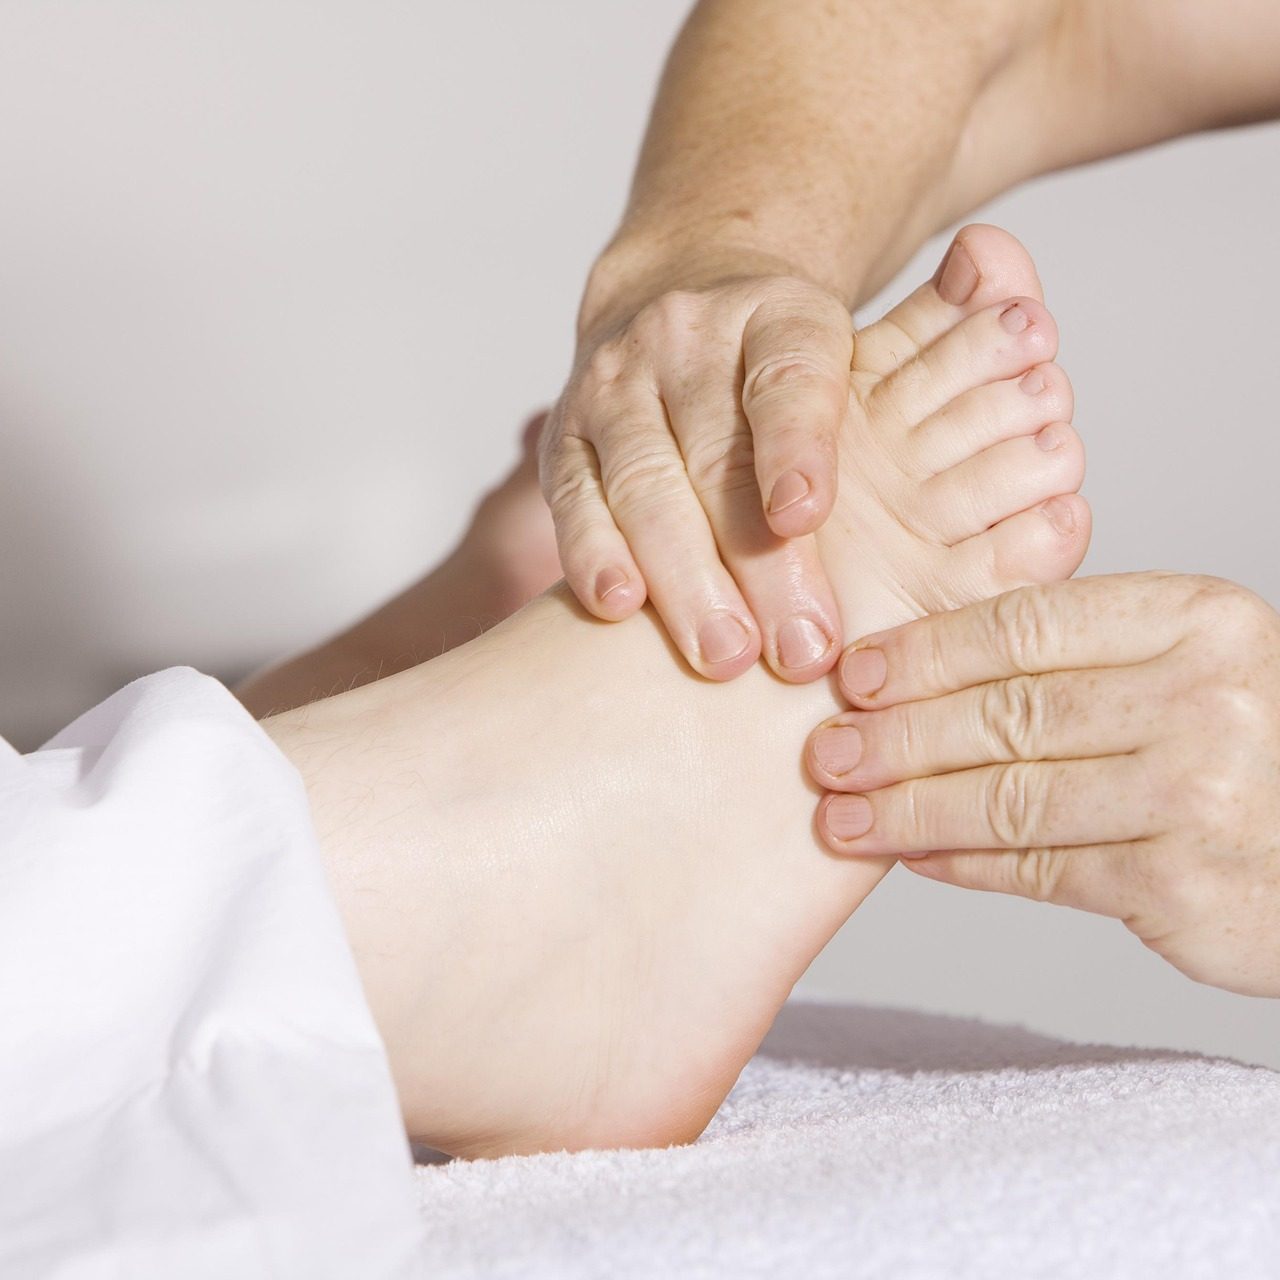 https://bijdepedicure.nl/wp-content/uploads/2023/04/physical-therapy-2133286_1920-1280x1280.jpg